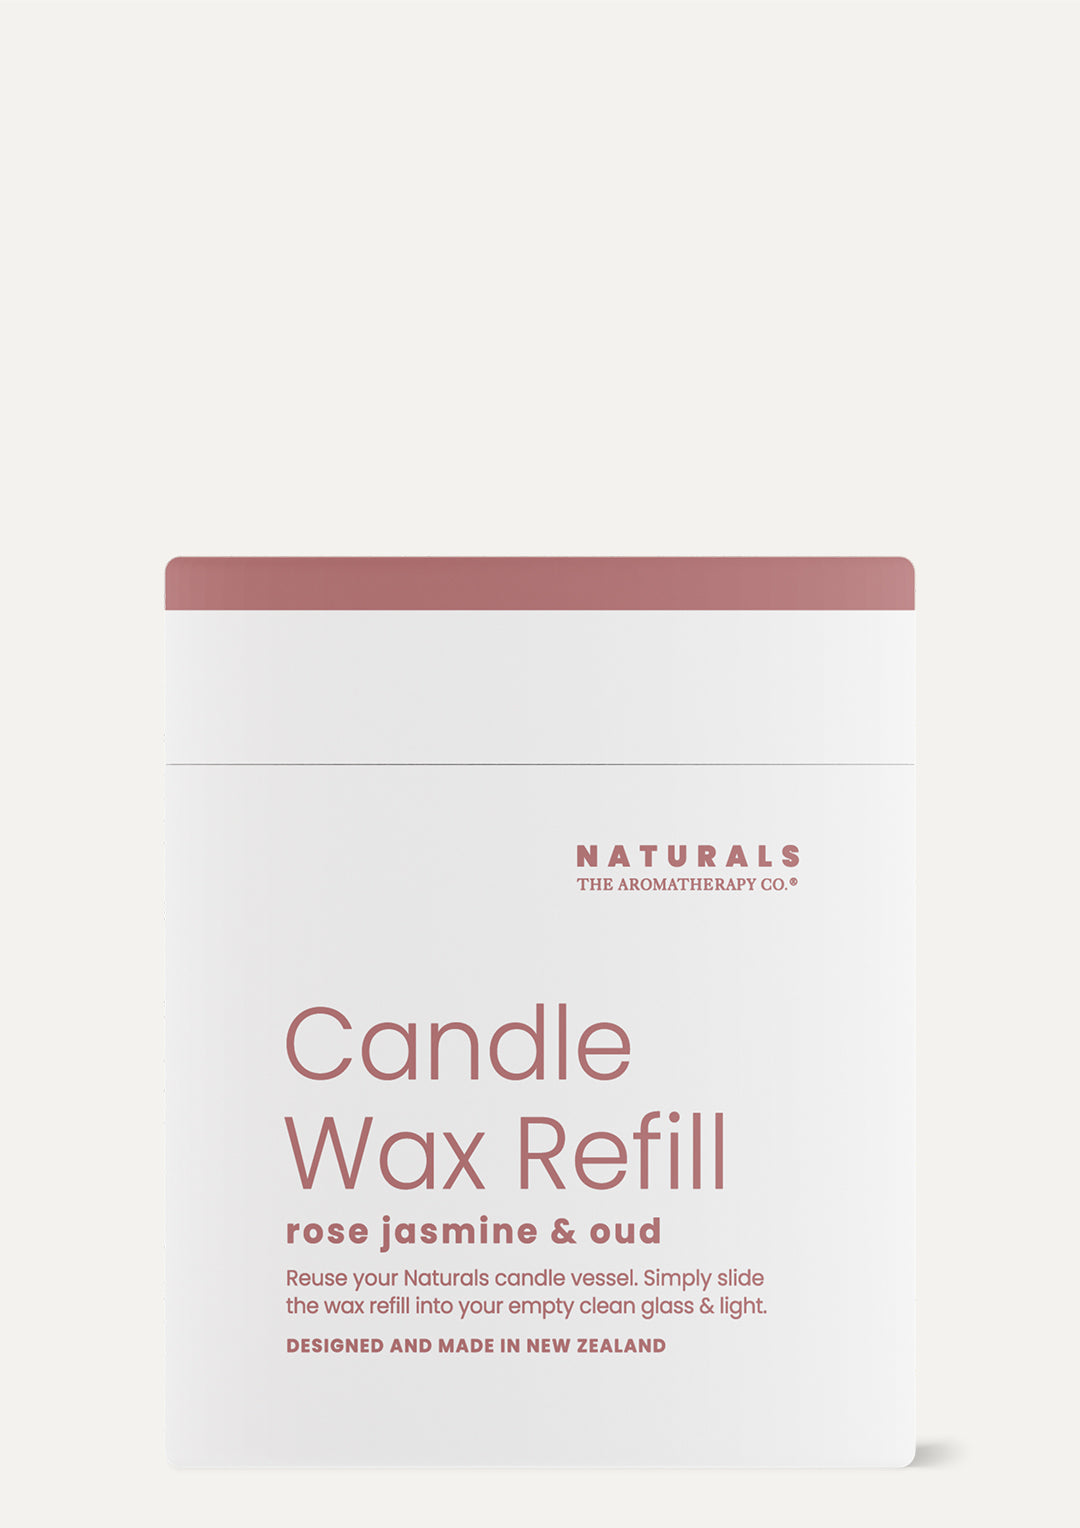 Naturals Candle Wax Refill - Rose Jasmine & Oud